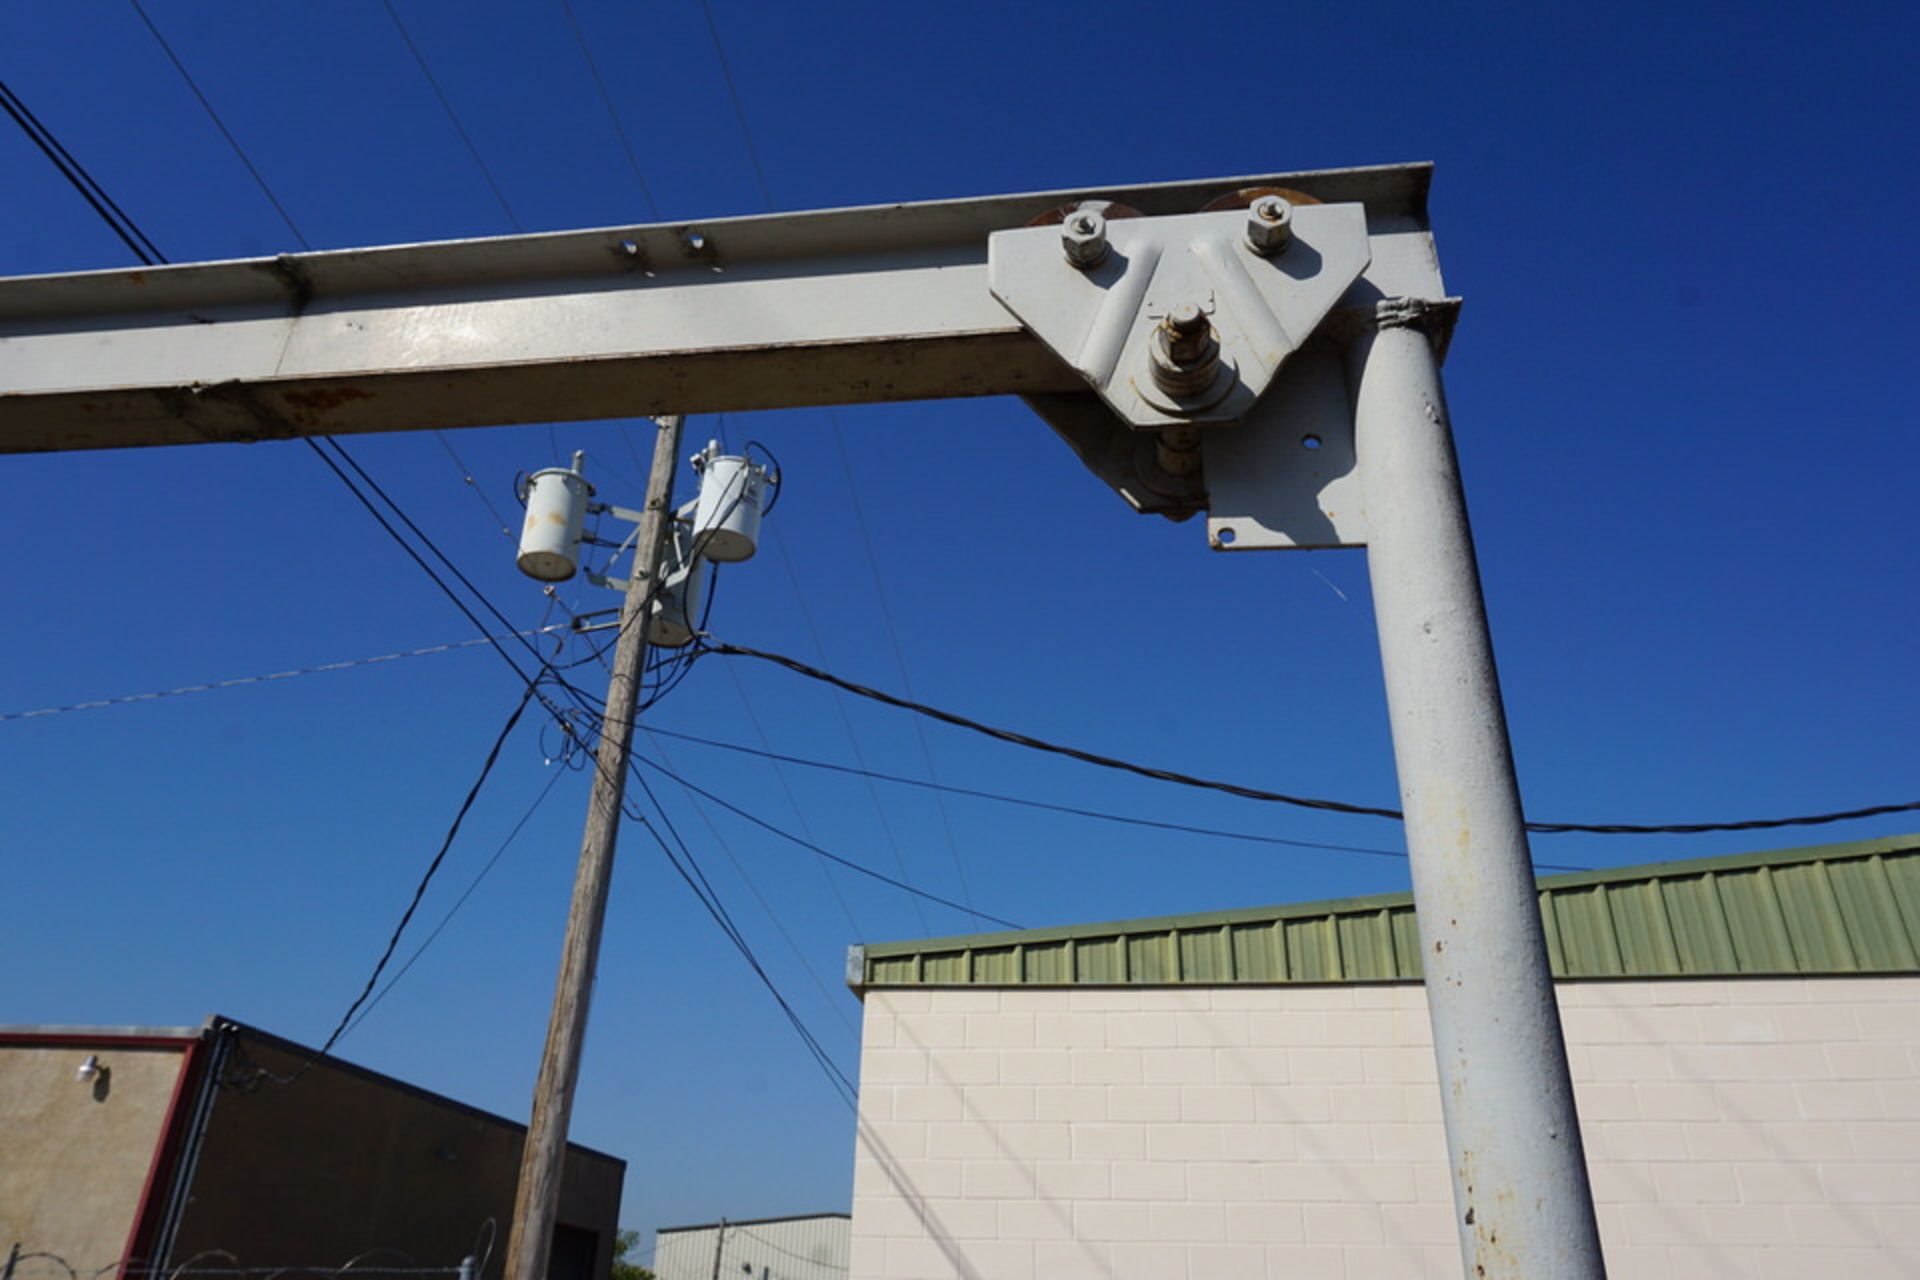 PORTABLE GANTRY FOR HOIST, APPROX 10' W X 8 1/2' TALL NO HOIST - Image 2 of 2